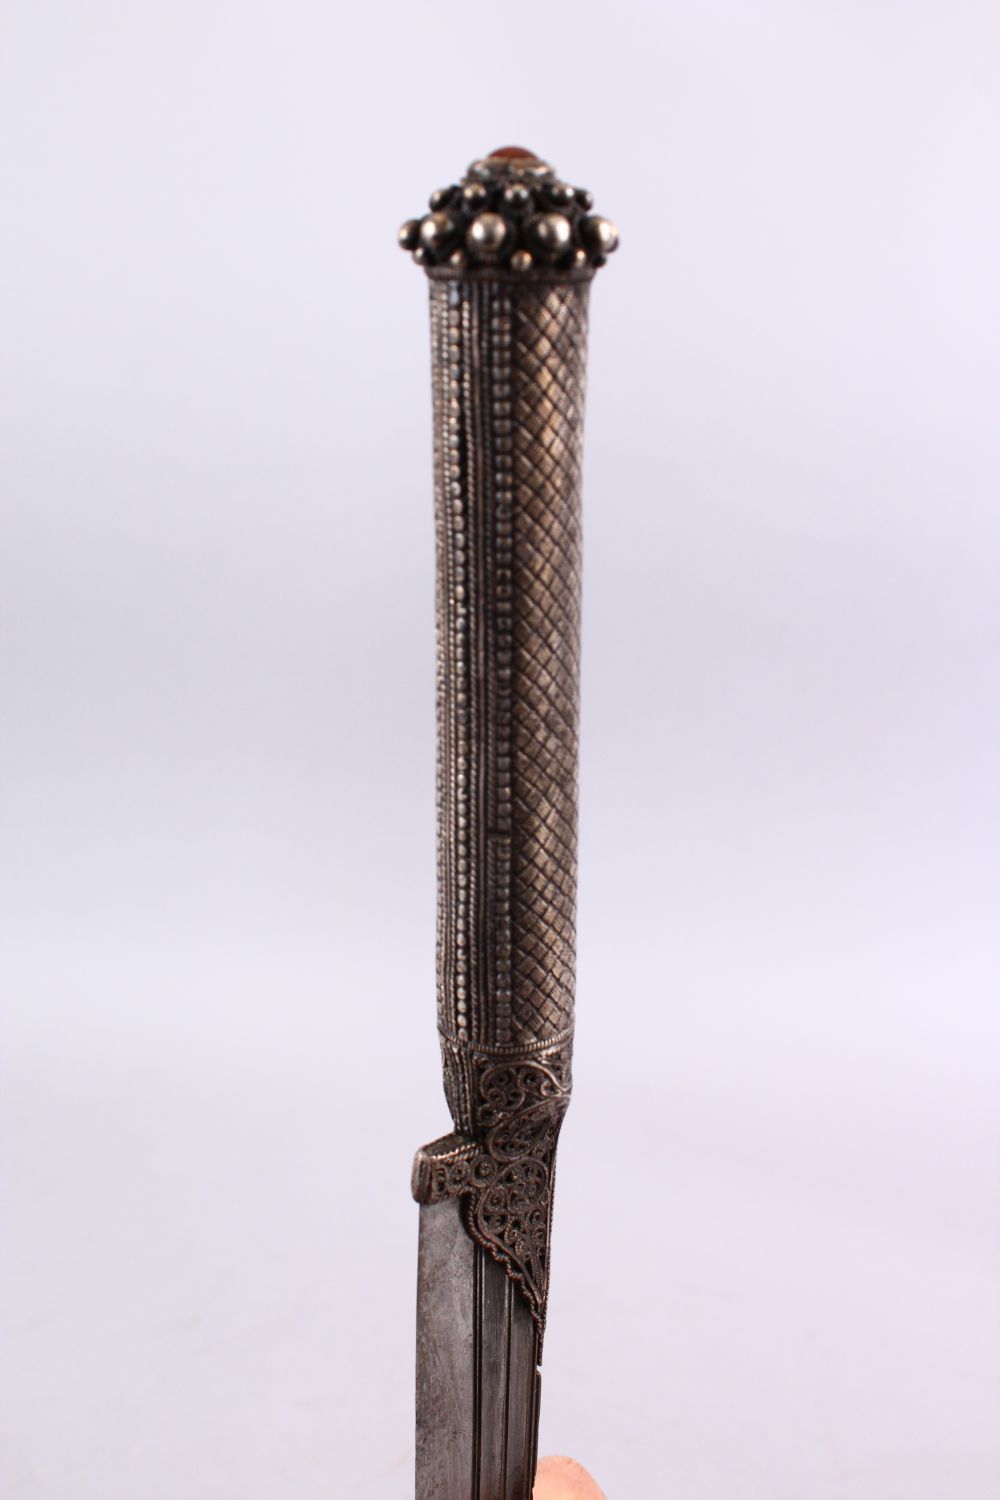 AN 18TH CENTURY OTTOMAN FINE SILVER WORK HANDLED SULTANS HANCER / DAGGER, with silver filigree style - Image 2 of 5